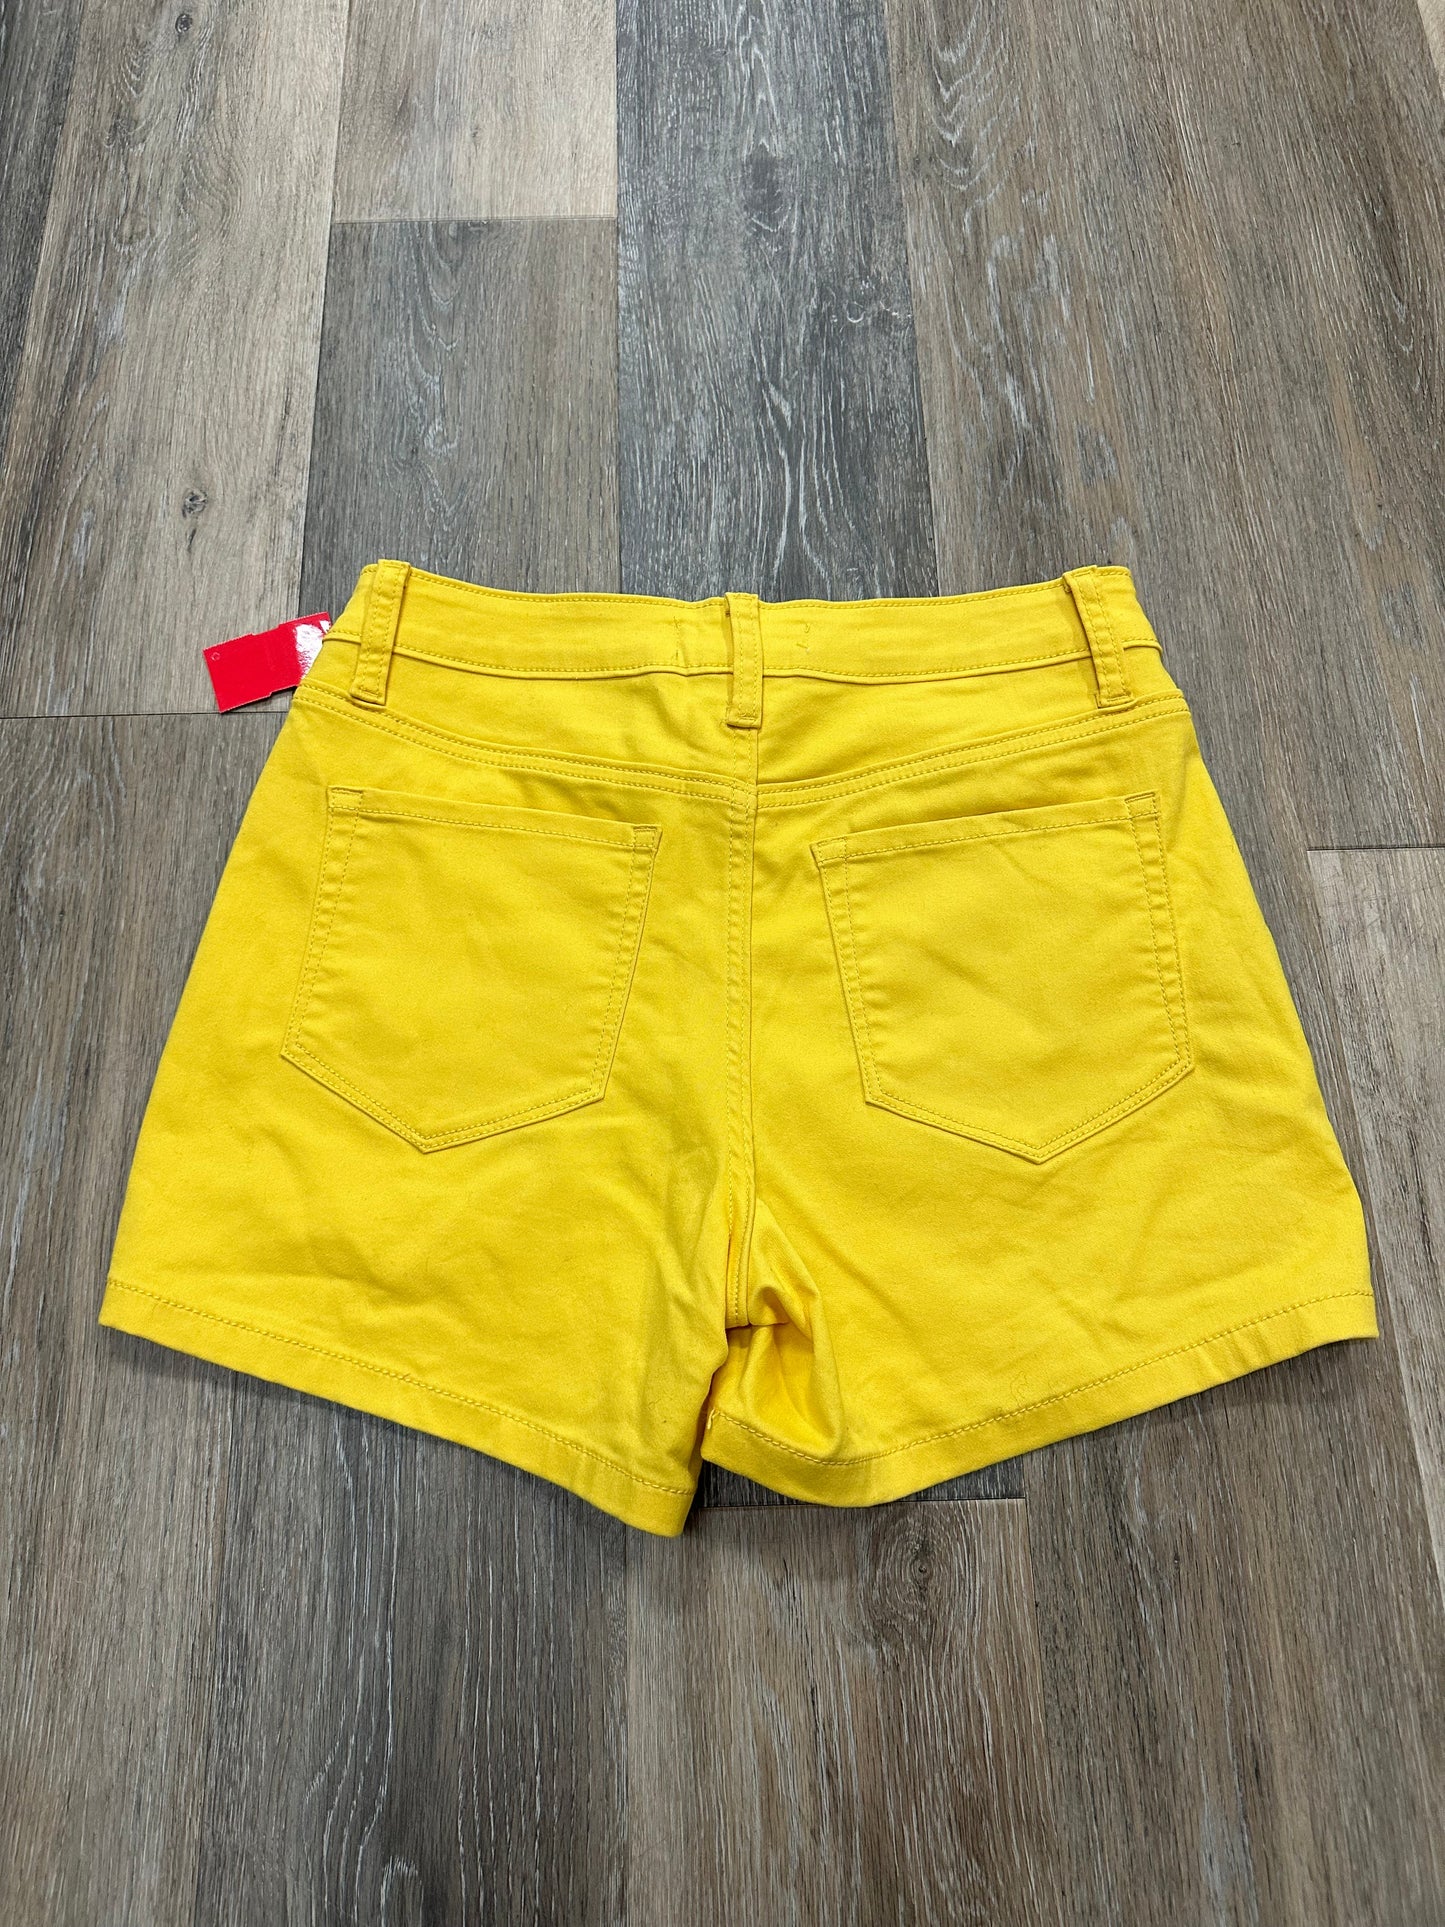 Shorts By Zenana Outfitters  Size: M